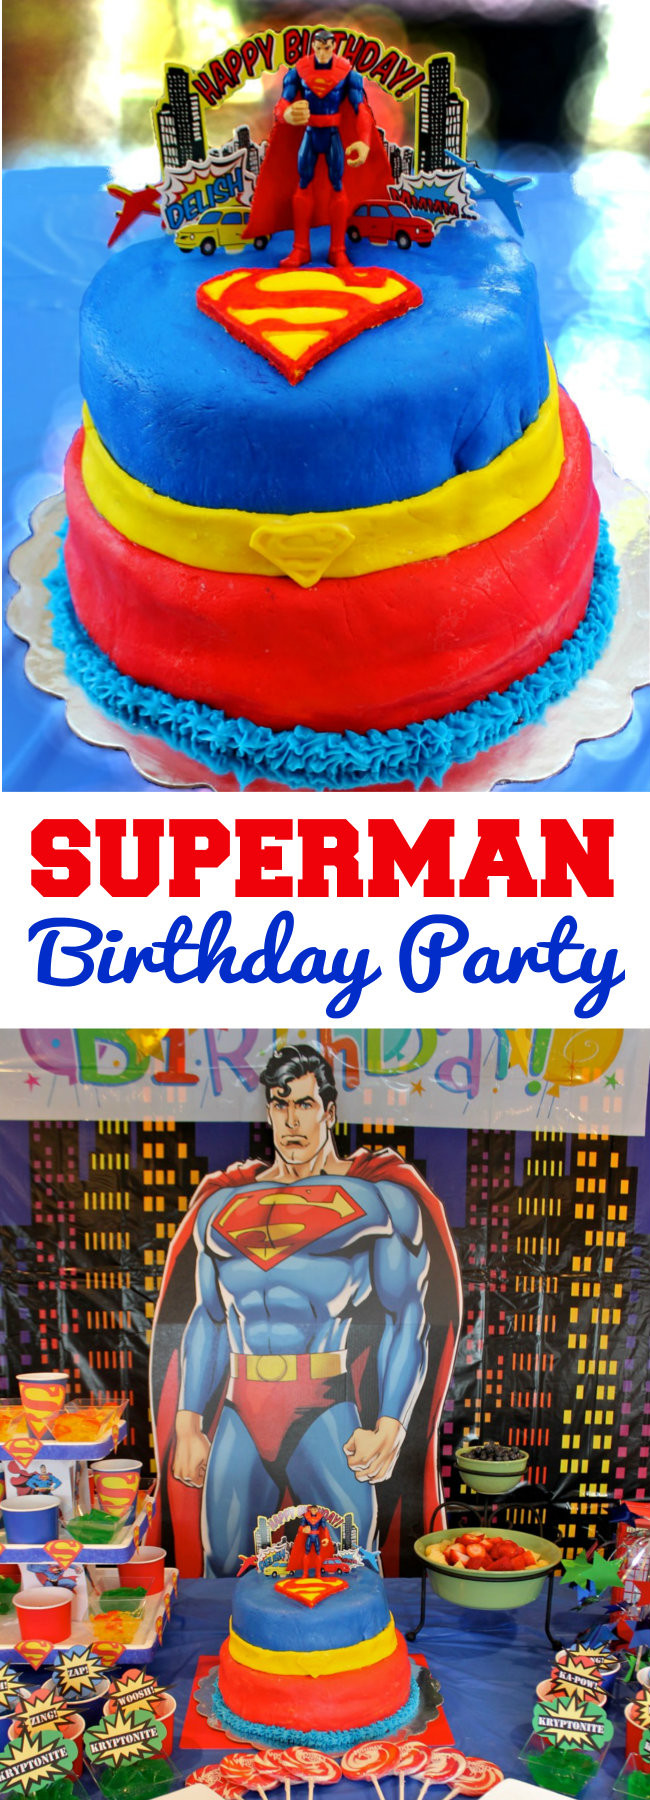 Superman Birthday Party Supplies
 Superman Birthday Party Happy and Blessed Home